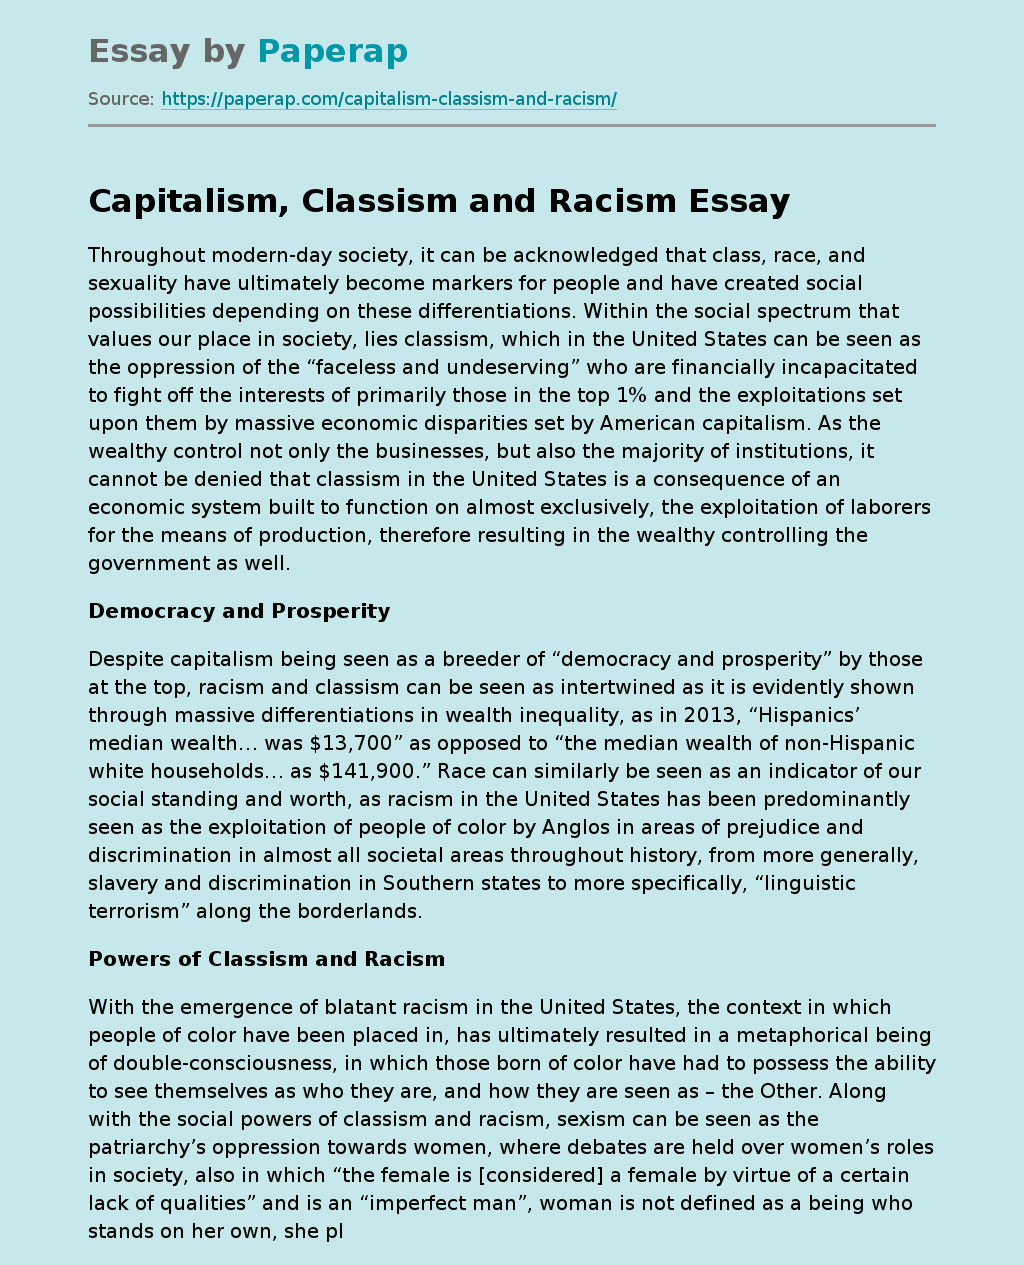 Capitalism, Classism and Racism